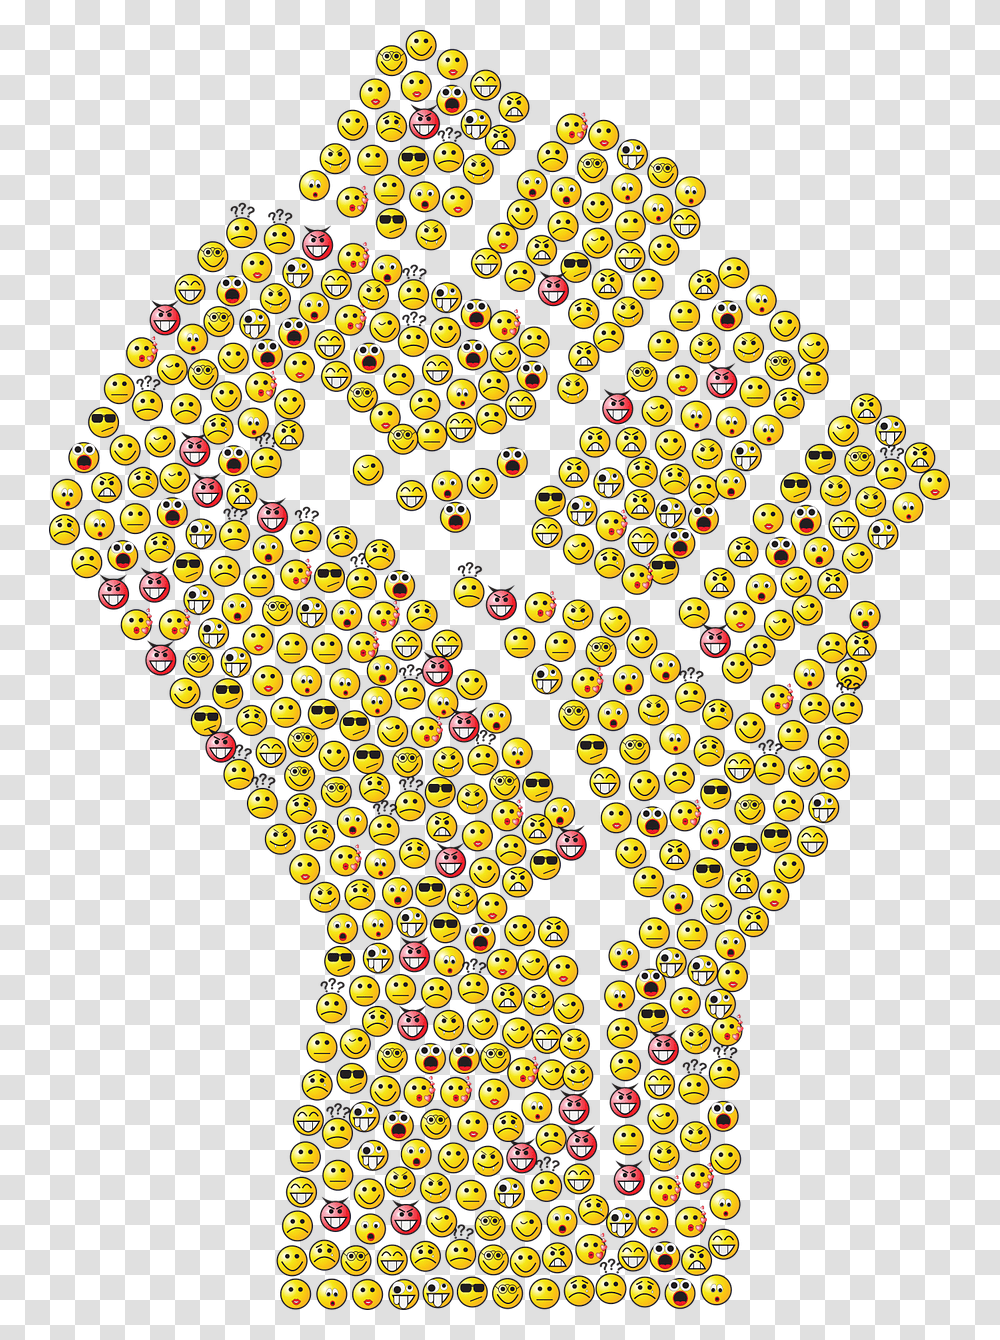 Fist Hand Clenched Free Photo Emoticon Tangan Mengepal, Pattern Transparent Png